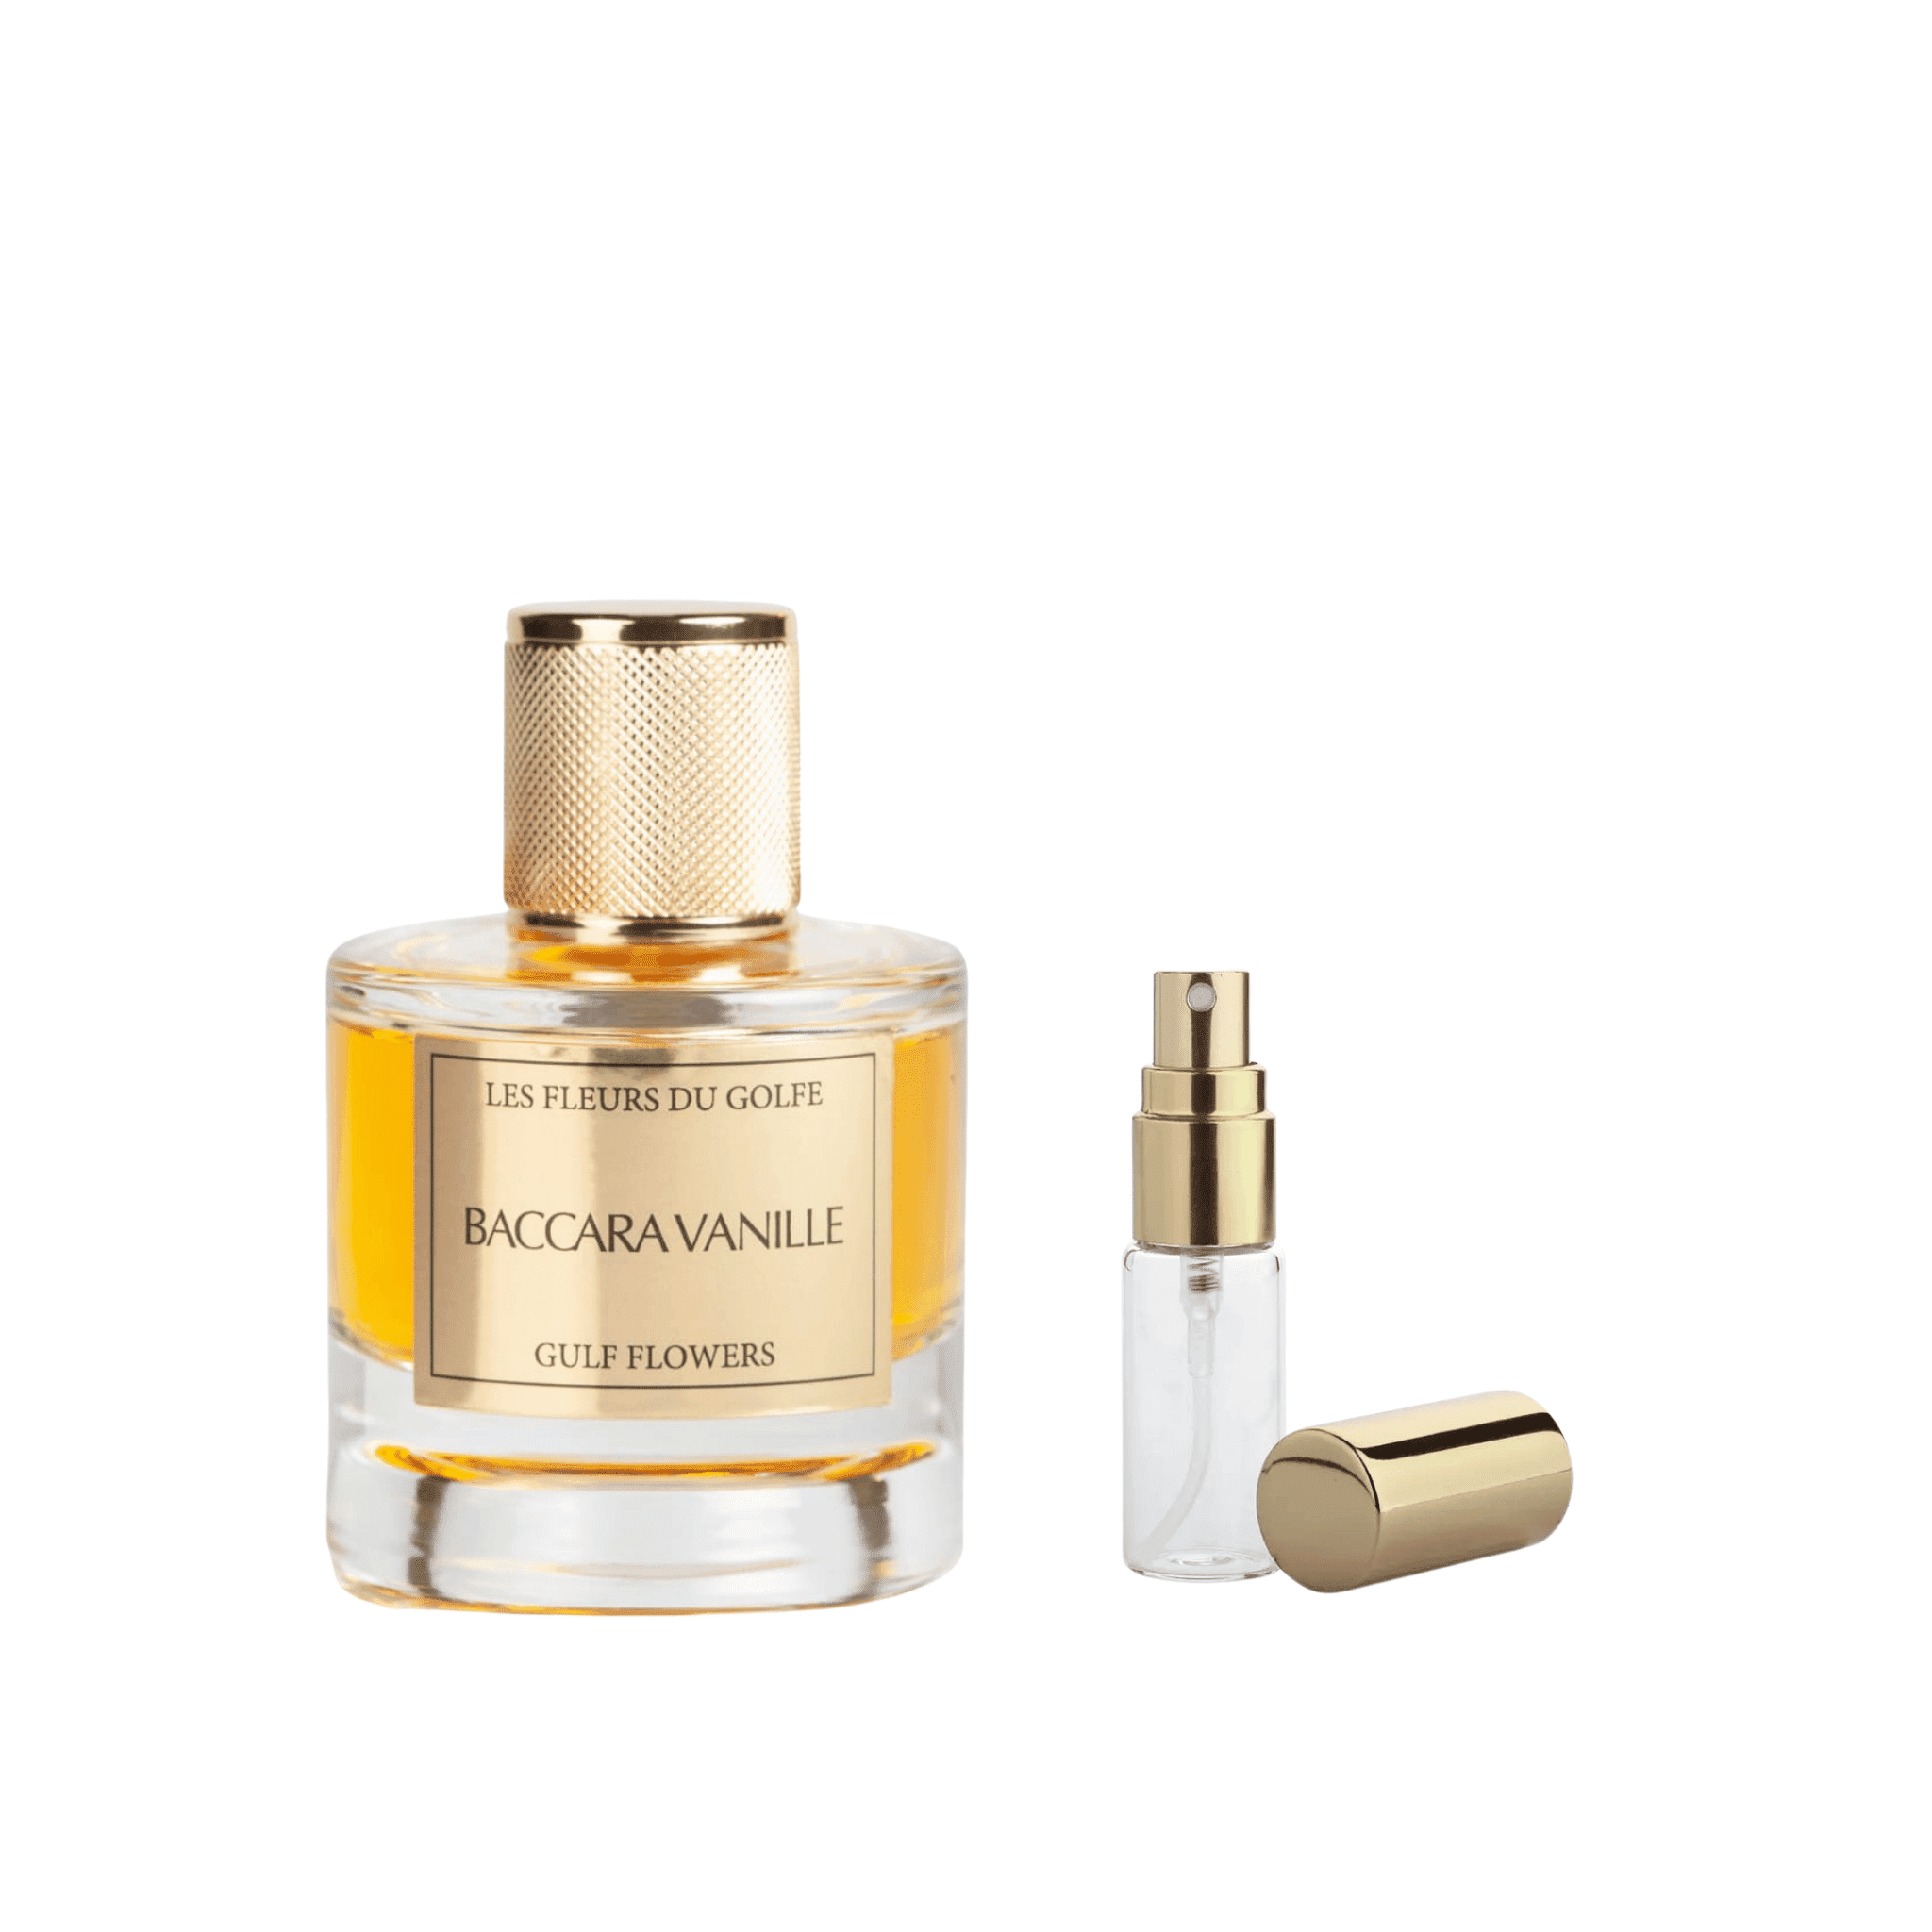 Baccarat Vanille sample size travel decant 5ml